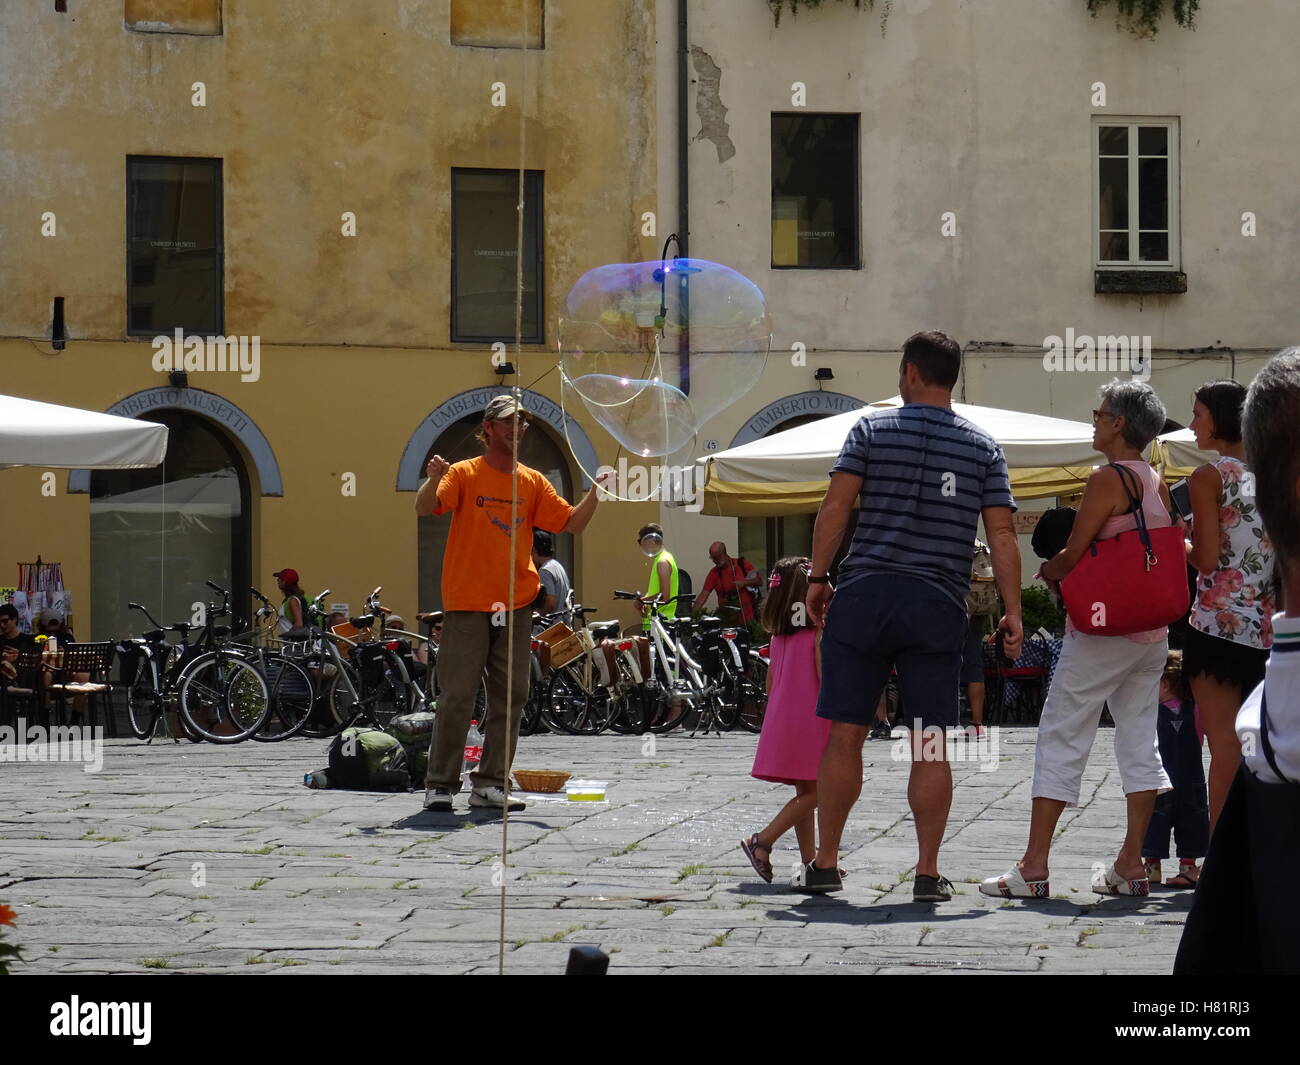 Street entertainer creating large bubbles to entertain a small crowd Stock Photo